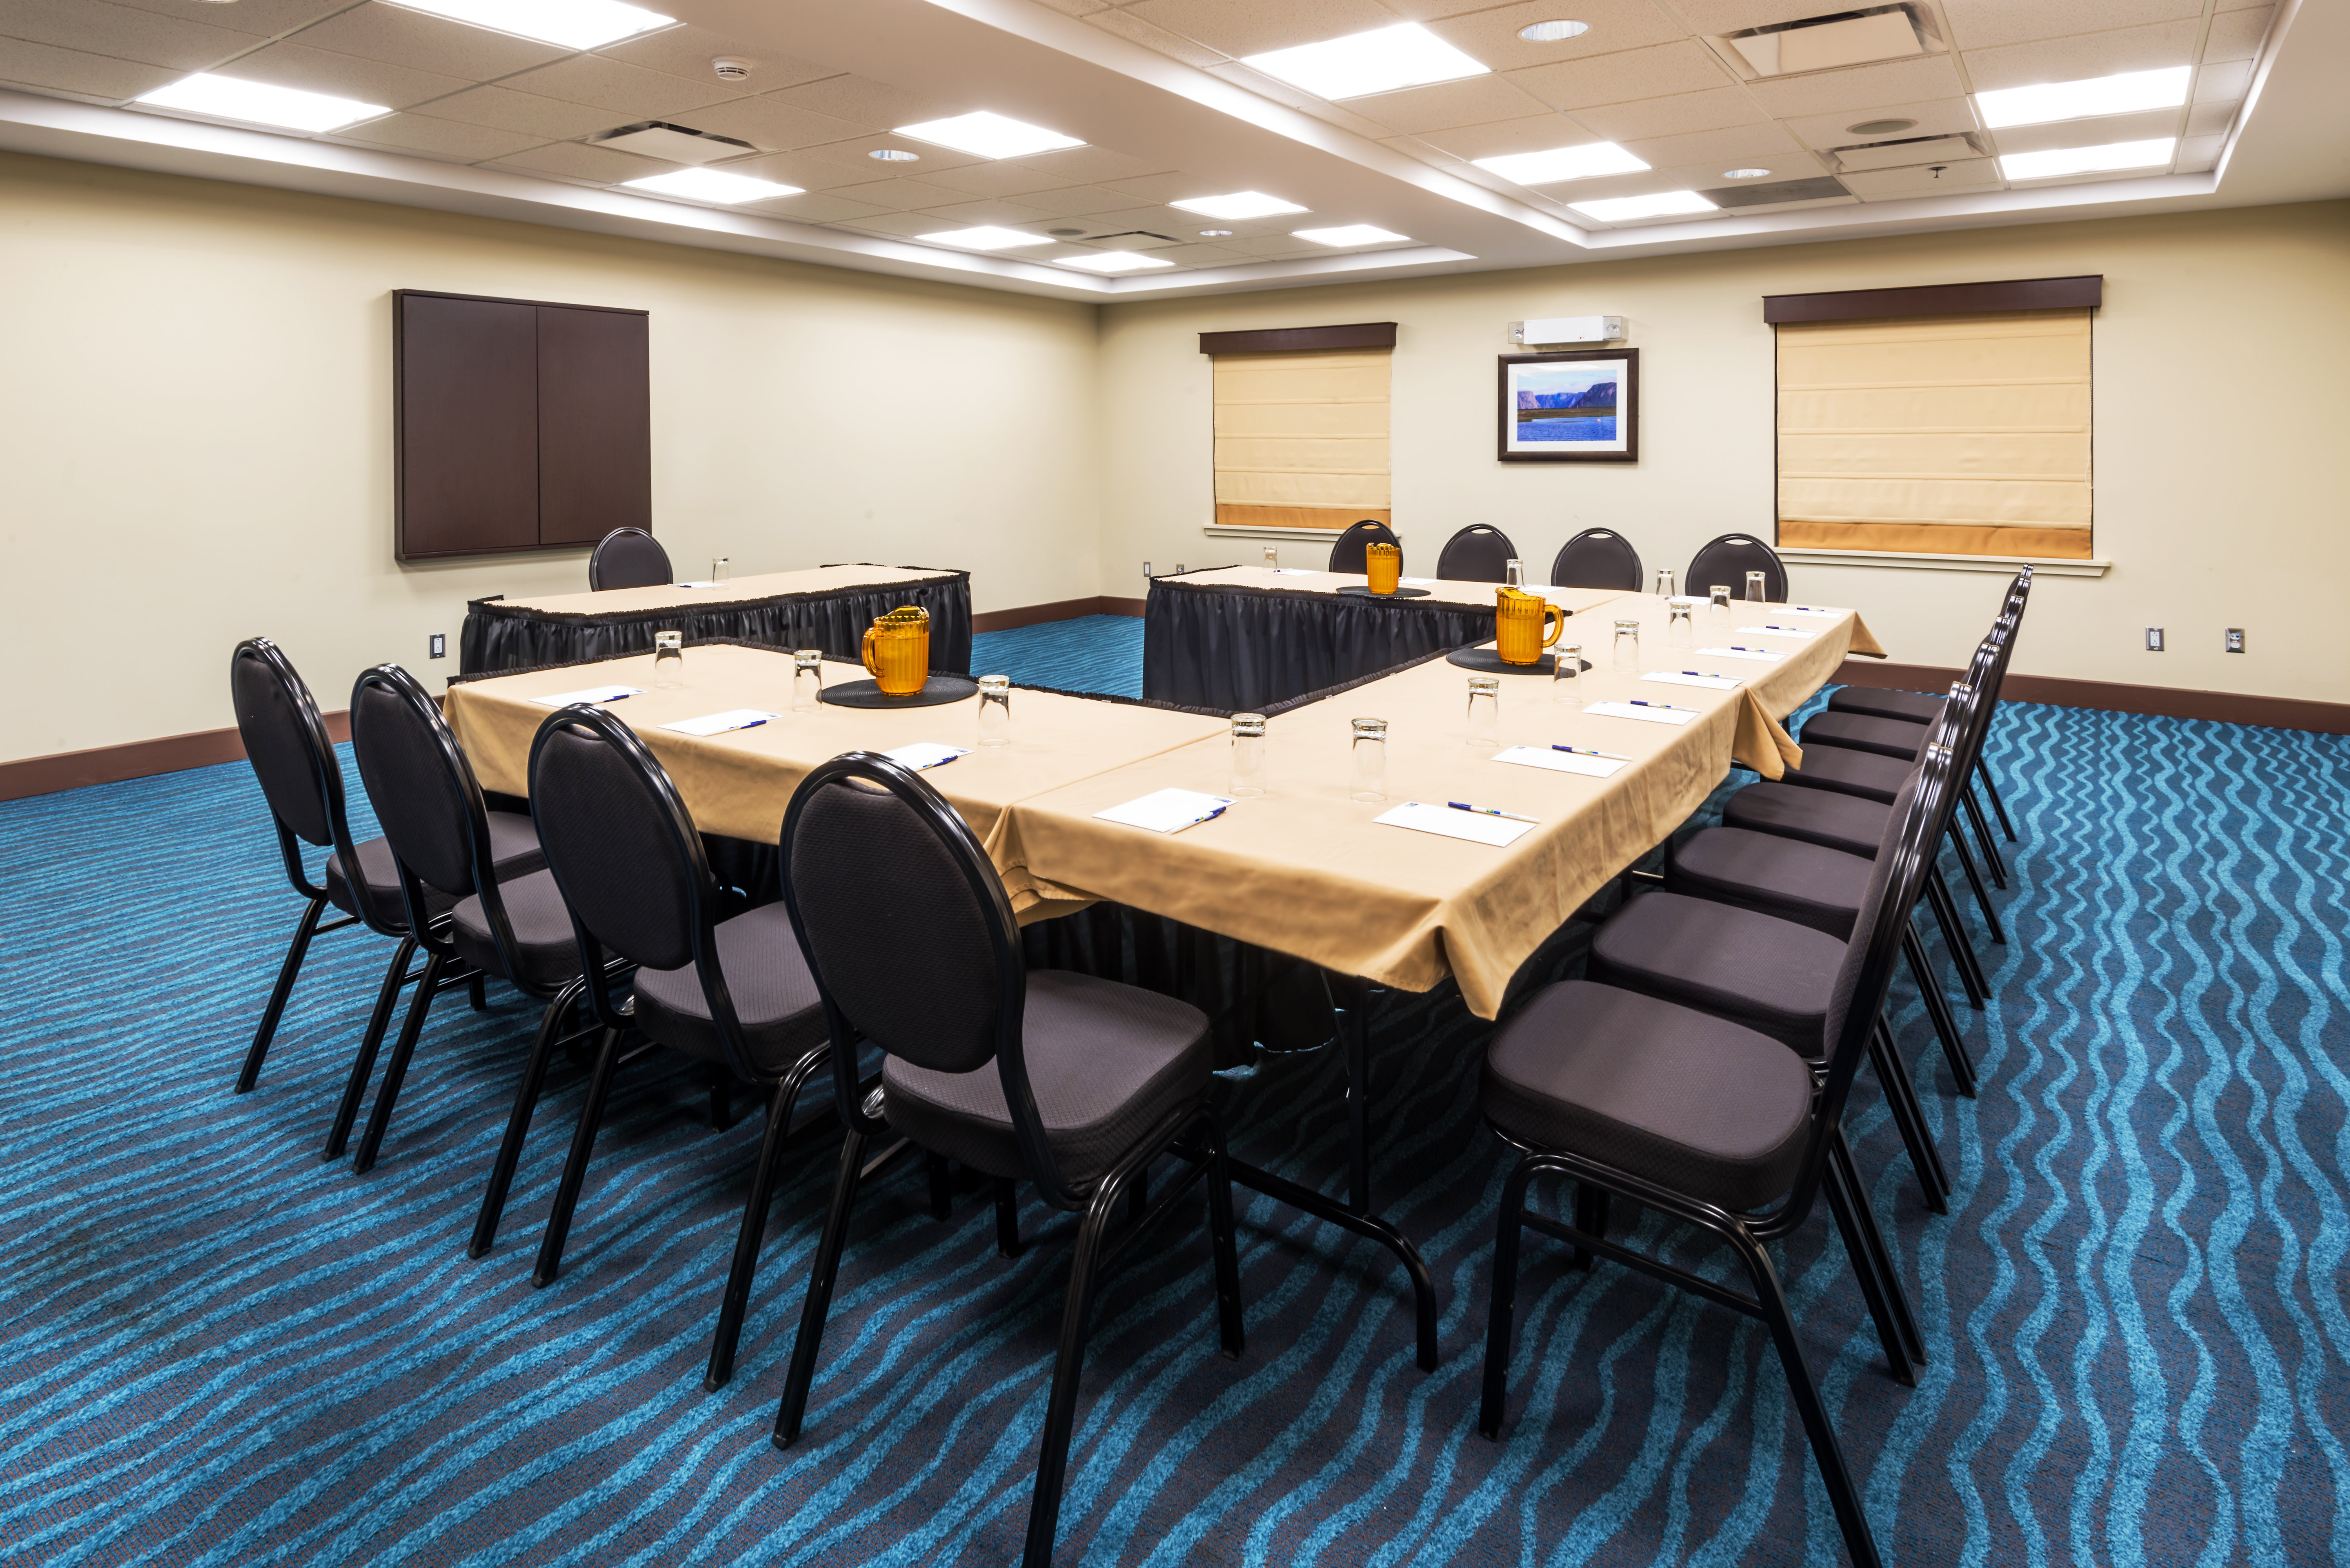 Host a meeting in our perfect venue for your next business needs.